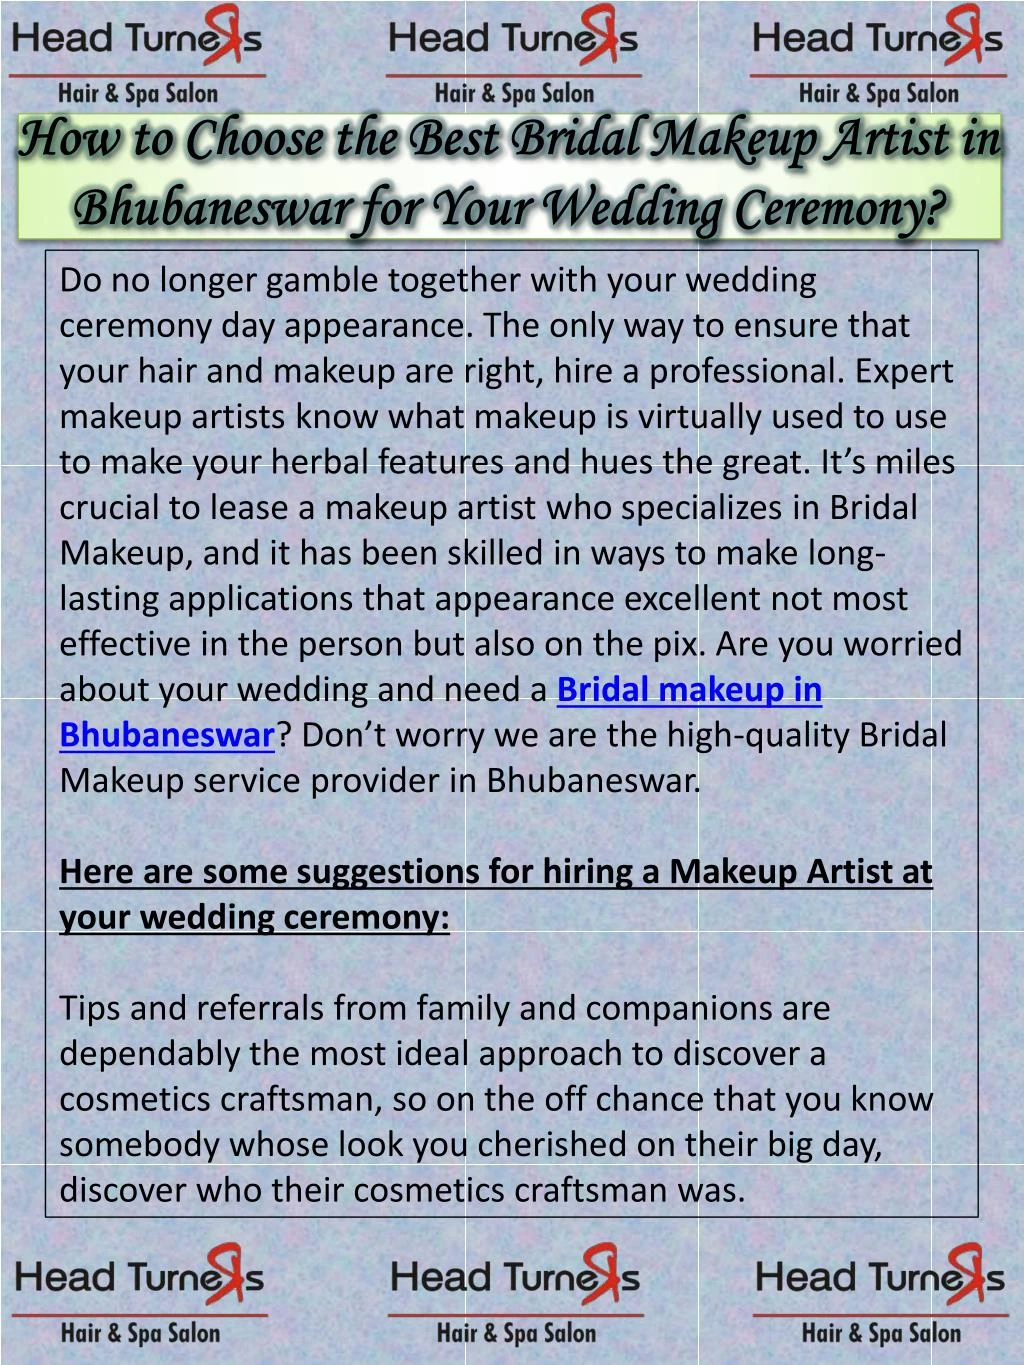 how to choose the best bridal makeup artist in bhubaneswar for your wedding ceremony